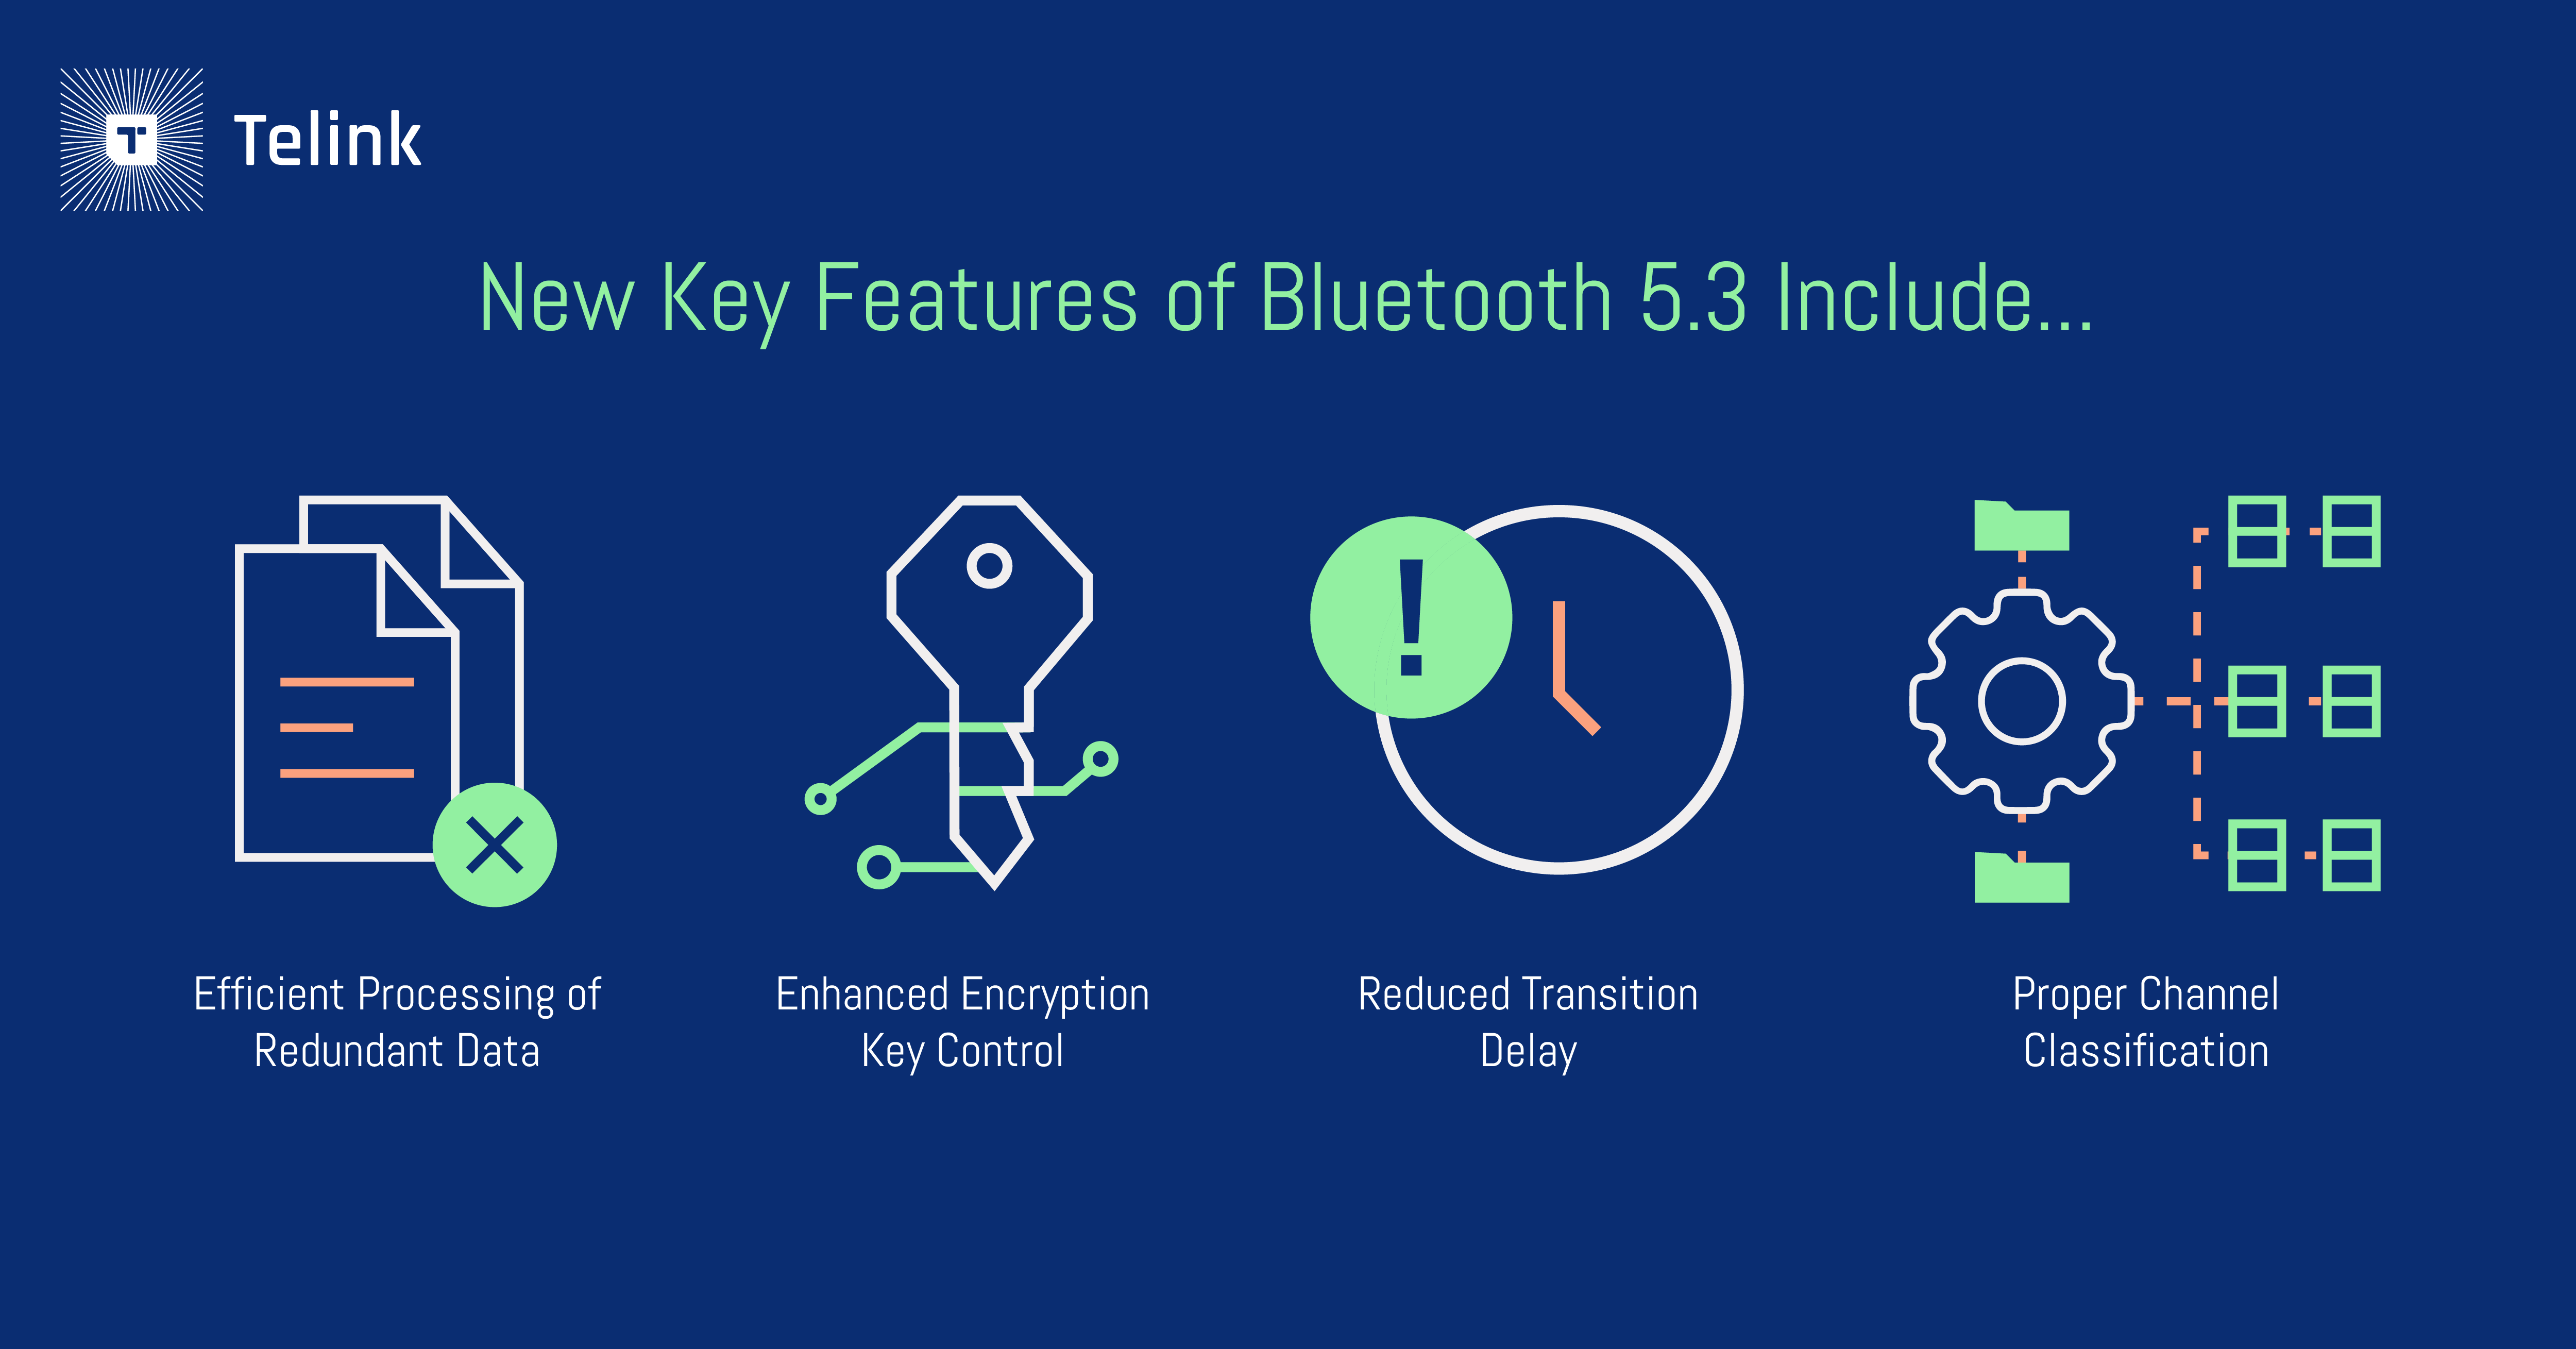 New key features of Bluetooth 5.3